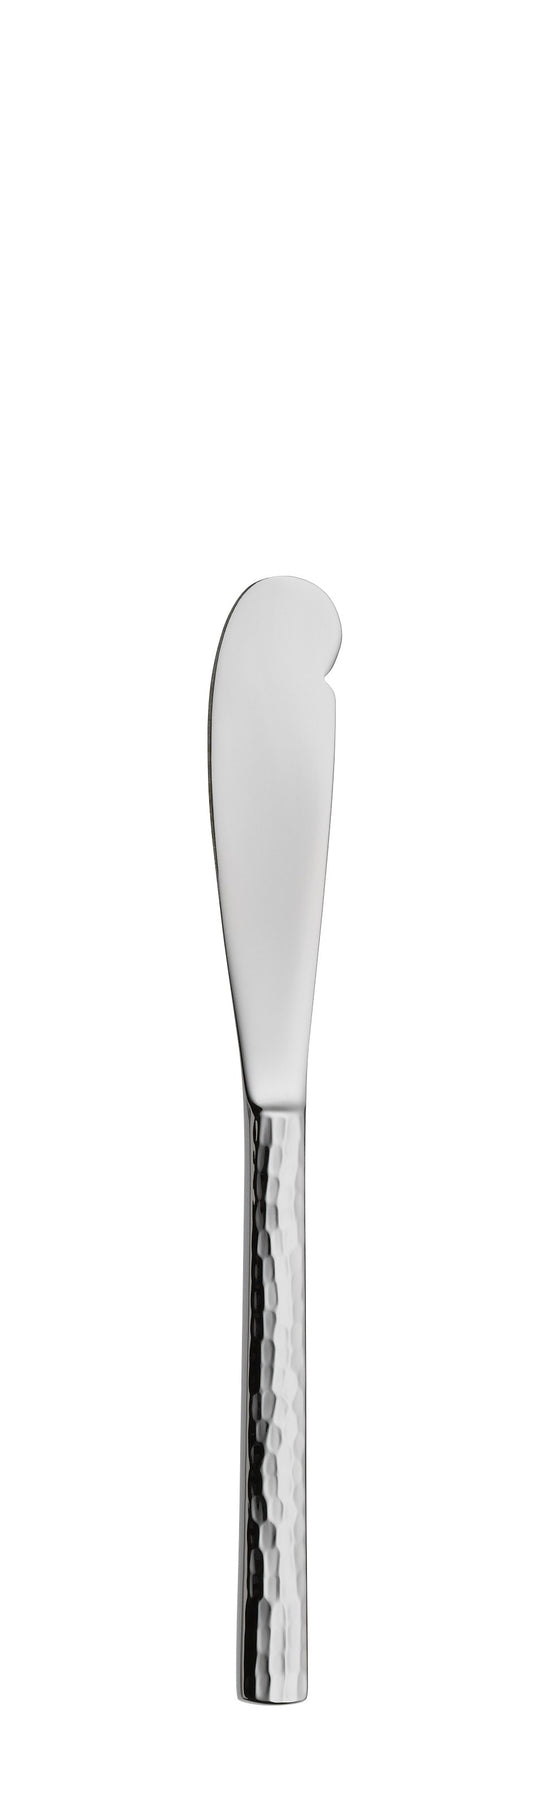 Butter knife LENISTA silver plated 170mm